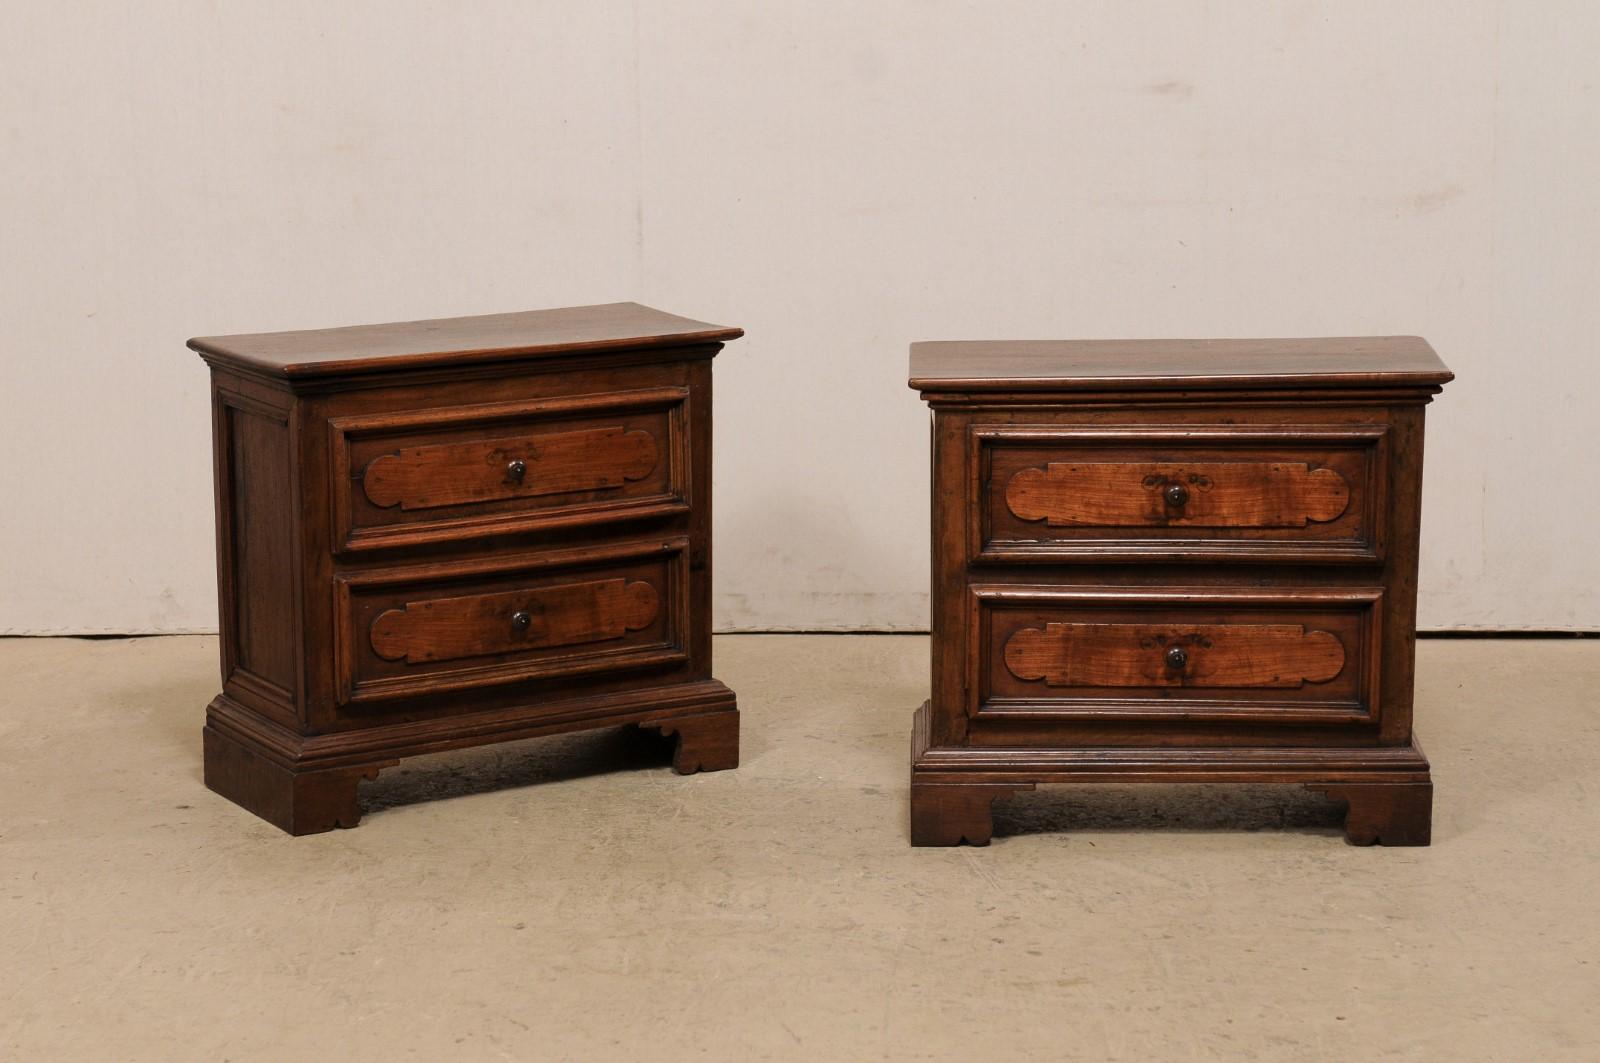 An Italian pair of walnut wood side chests from the mid 20th century. This pair of vintage commodes from Italy (mid-century in age, though were created from older wood) are each fitted with two drawers, and are raised upon a flat stacked molding